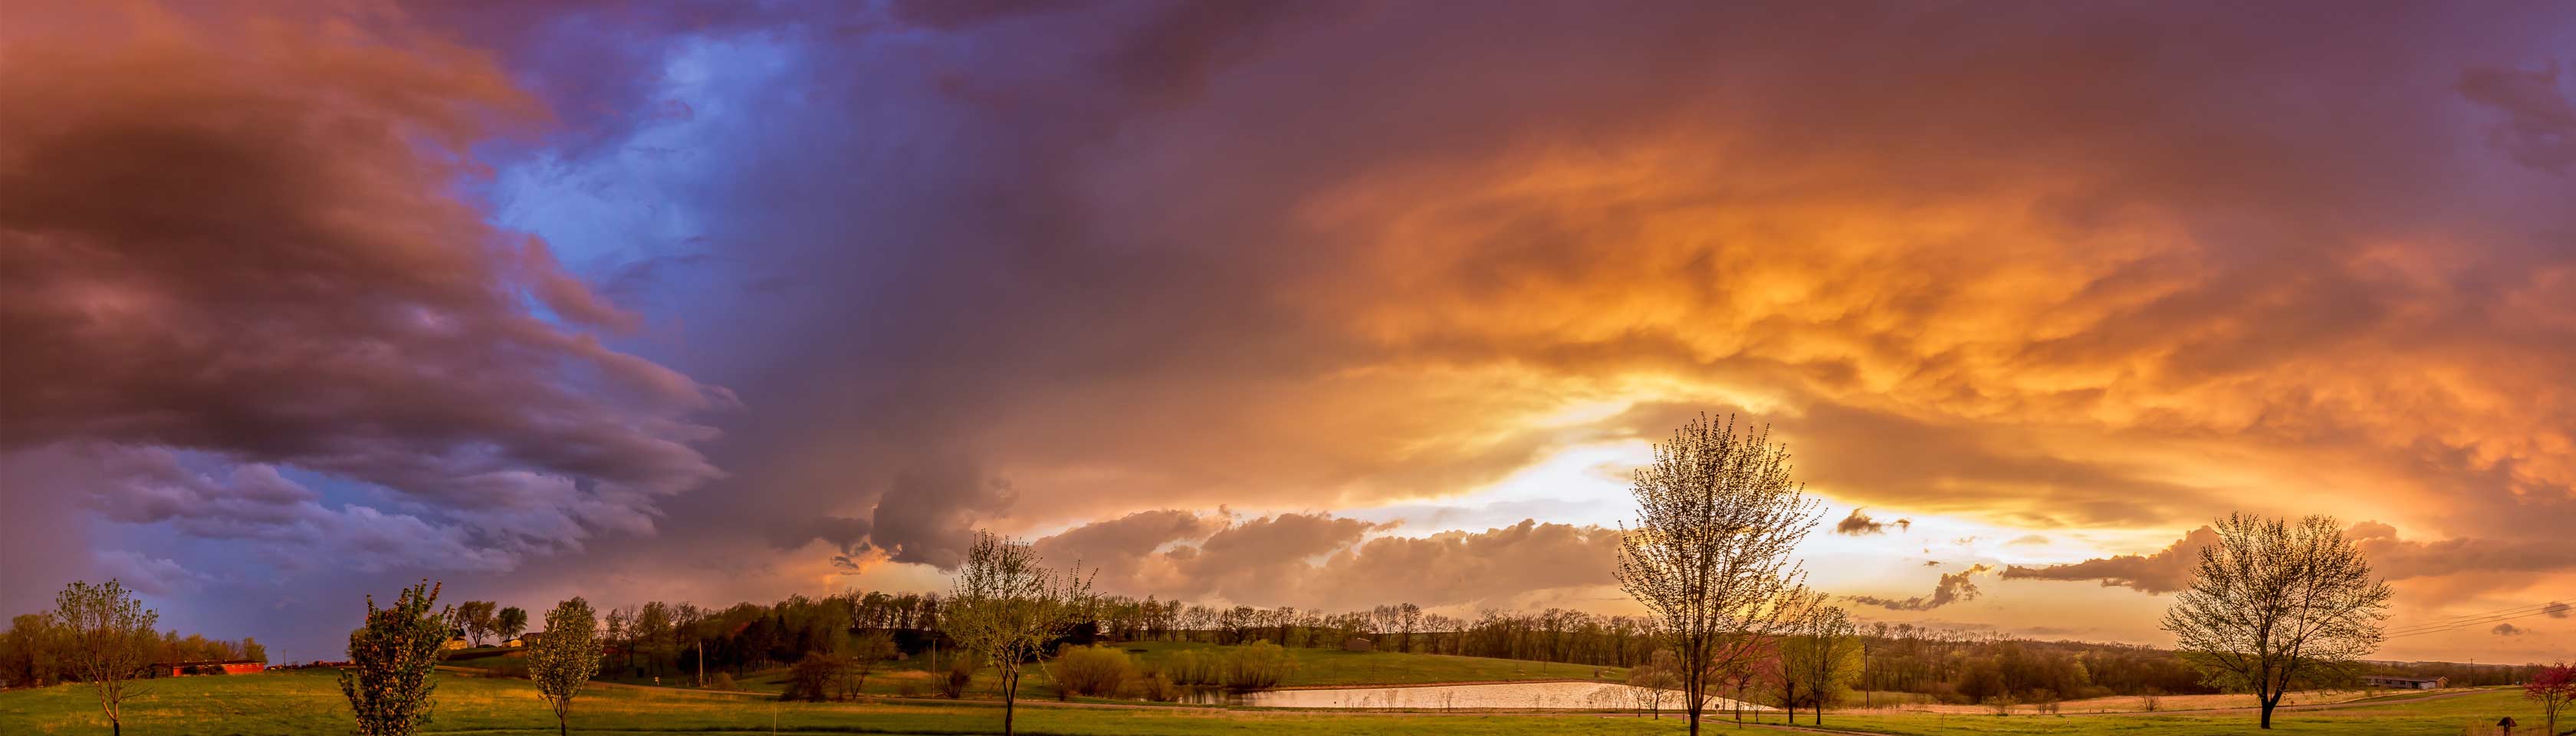 panoramic photo of a storm at sunset